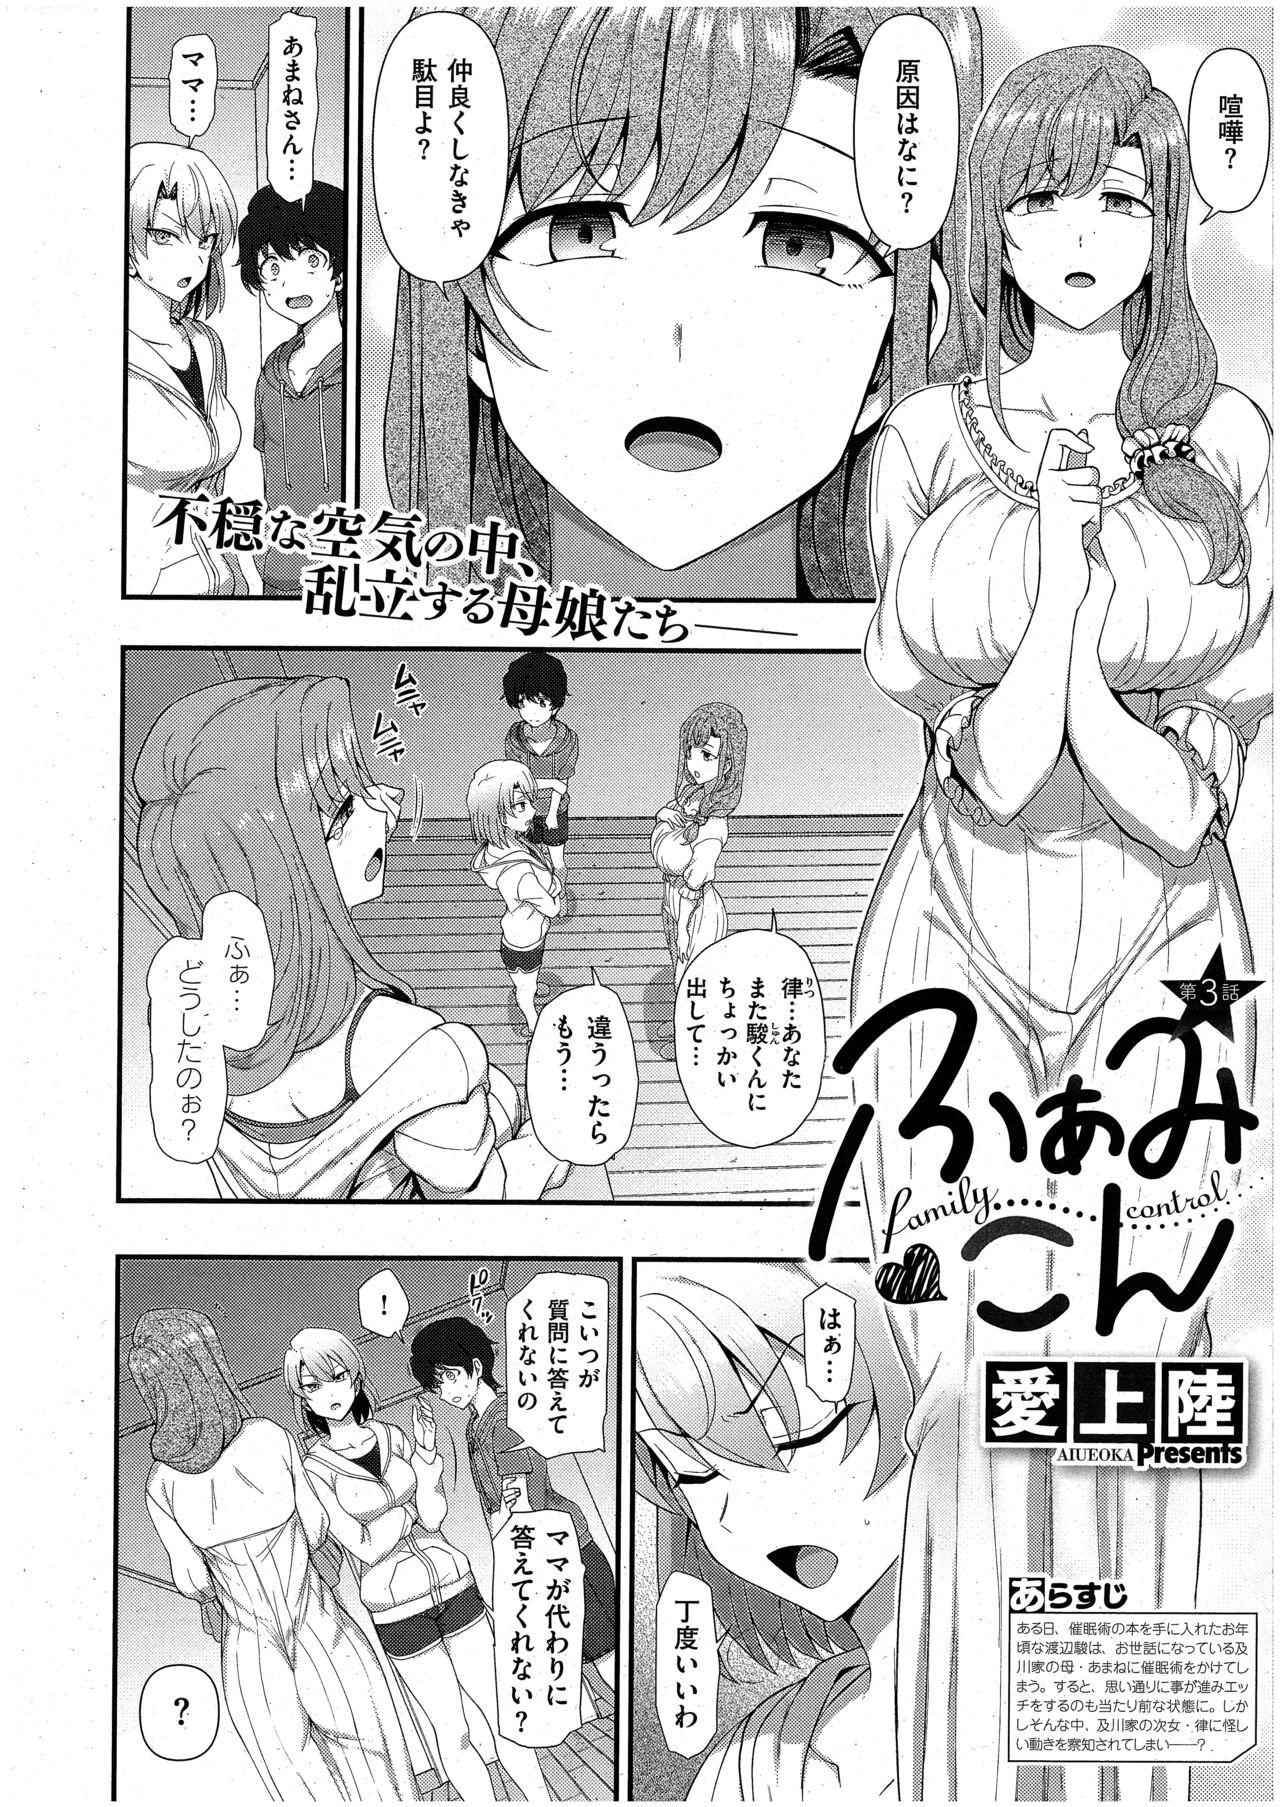 Tgirl FamiCon - Family Control Ch. 3 Stepbrother - Page 2